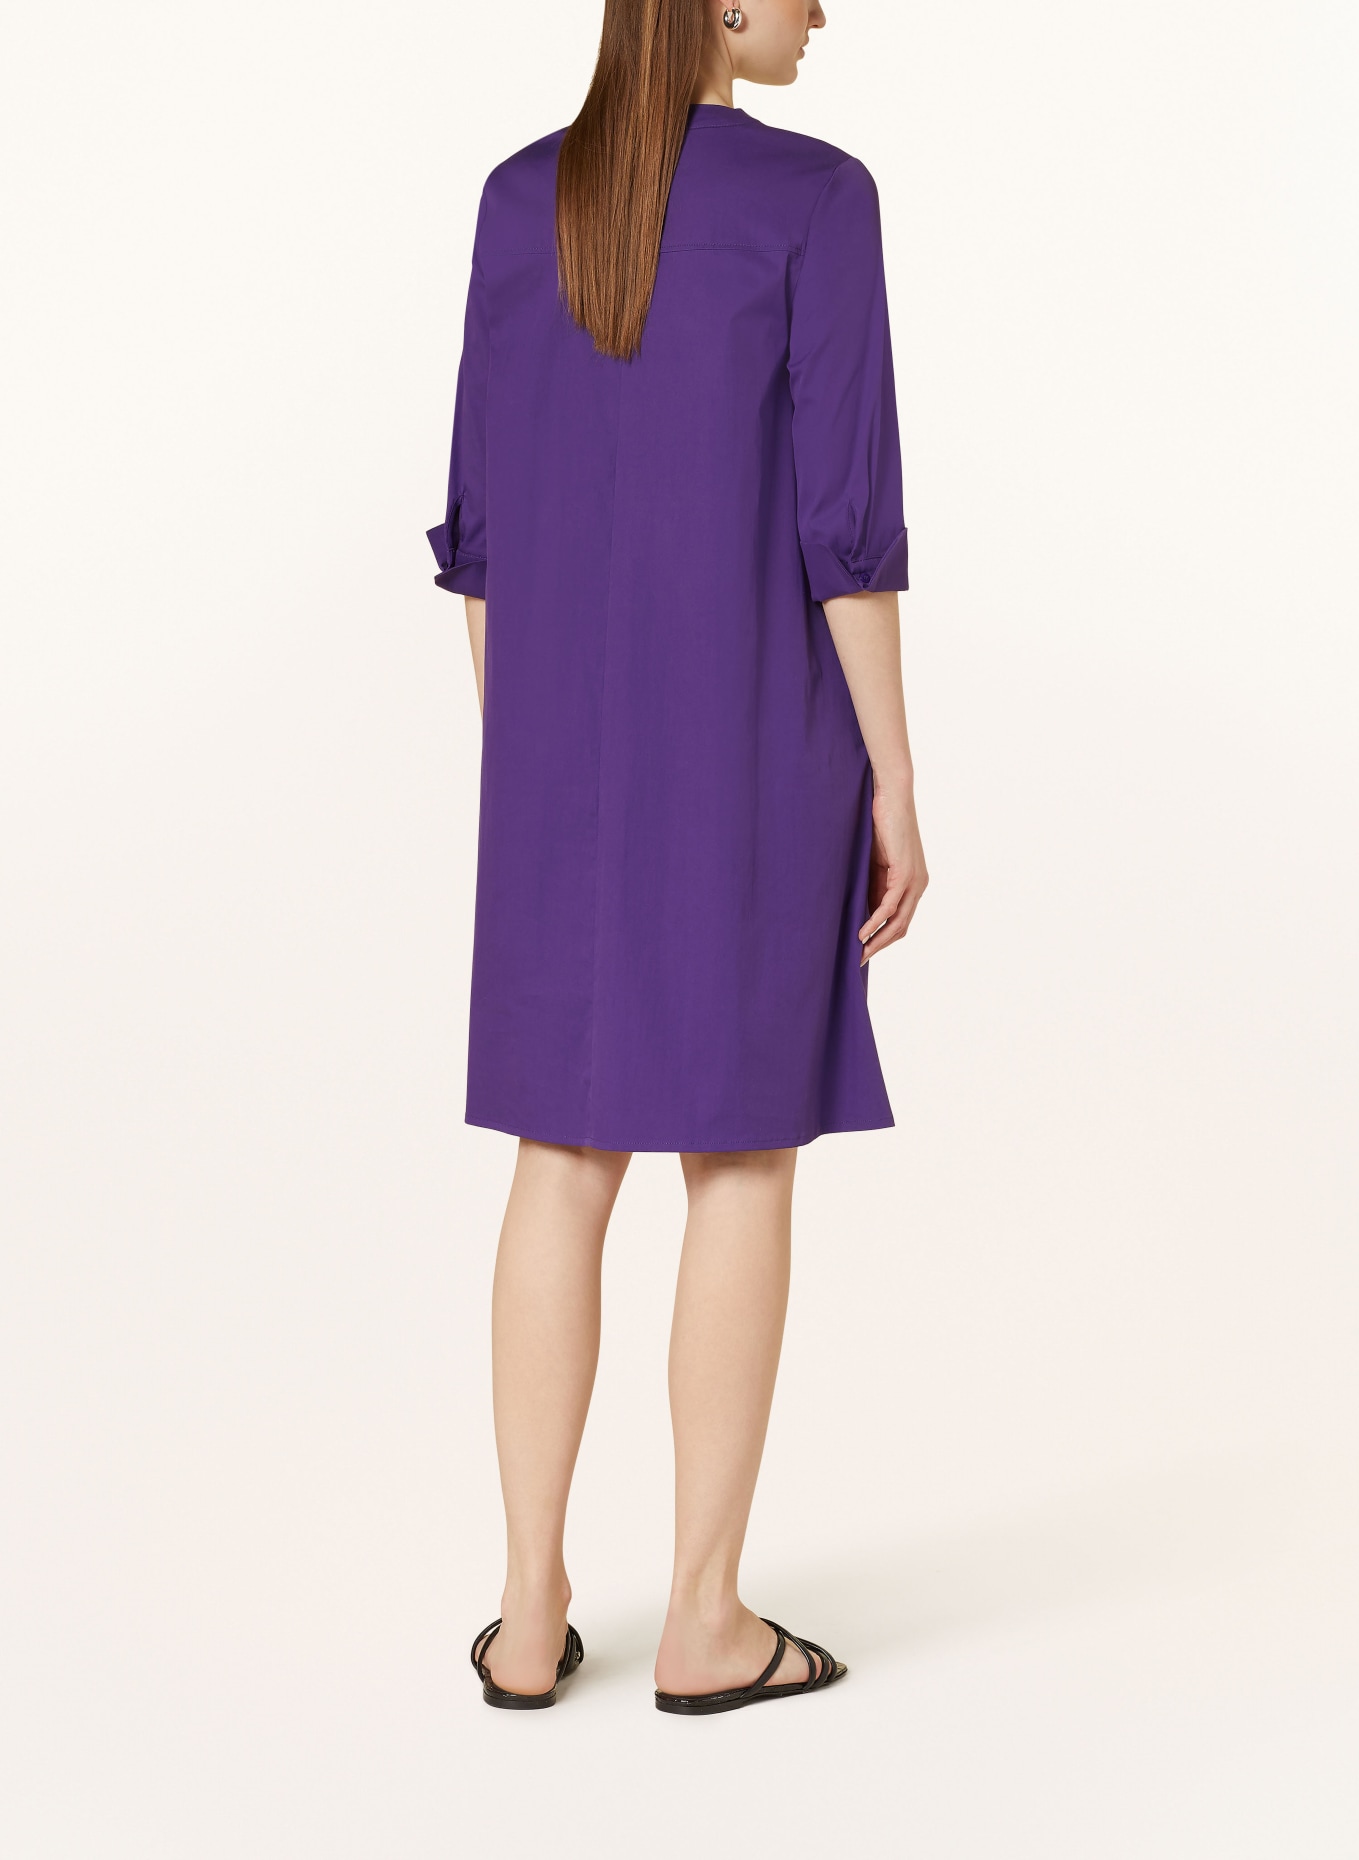 ROBE LÉGÈRE Dress with 3/4 sleeves, Color: PURPLE (Image 3)